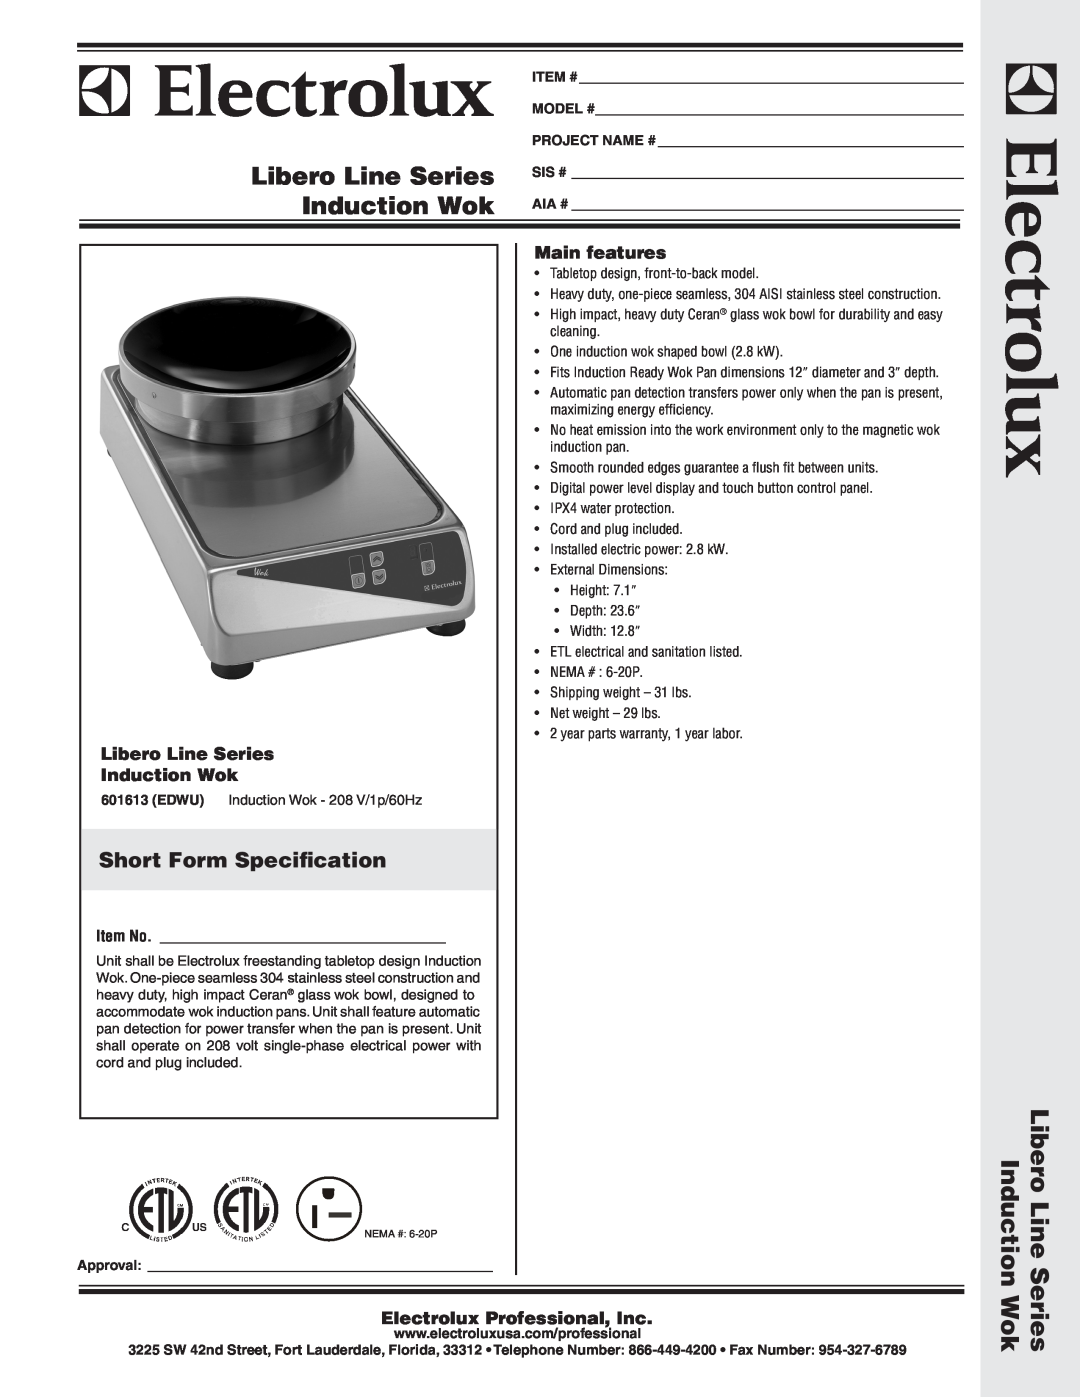 Electrolux 601613 dimensions Short Form Specification, Main features, Libero Line Series, Induction Wok, Item No, Edwu 